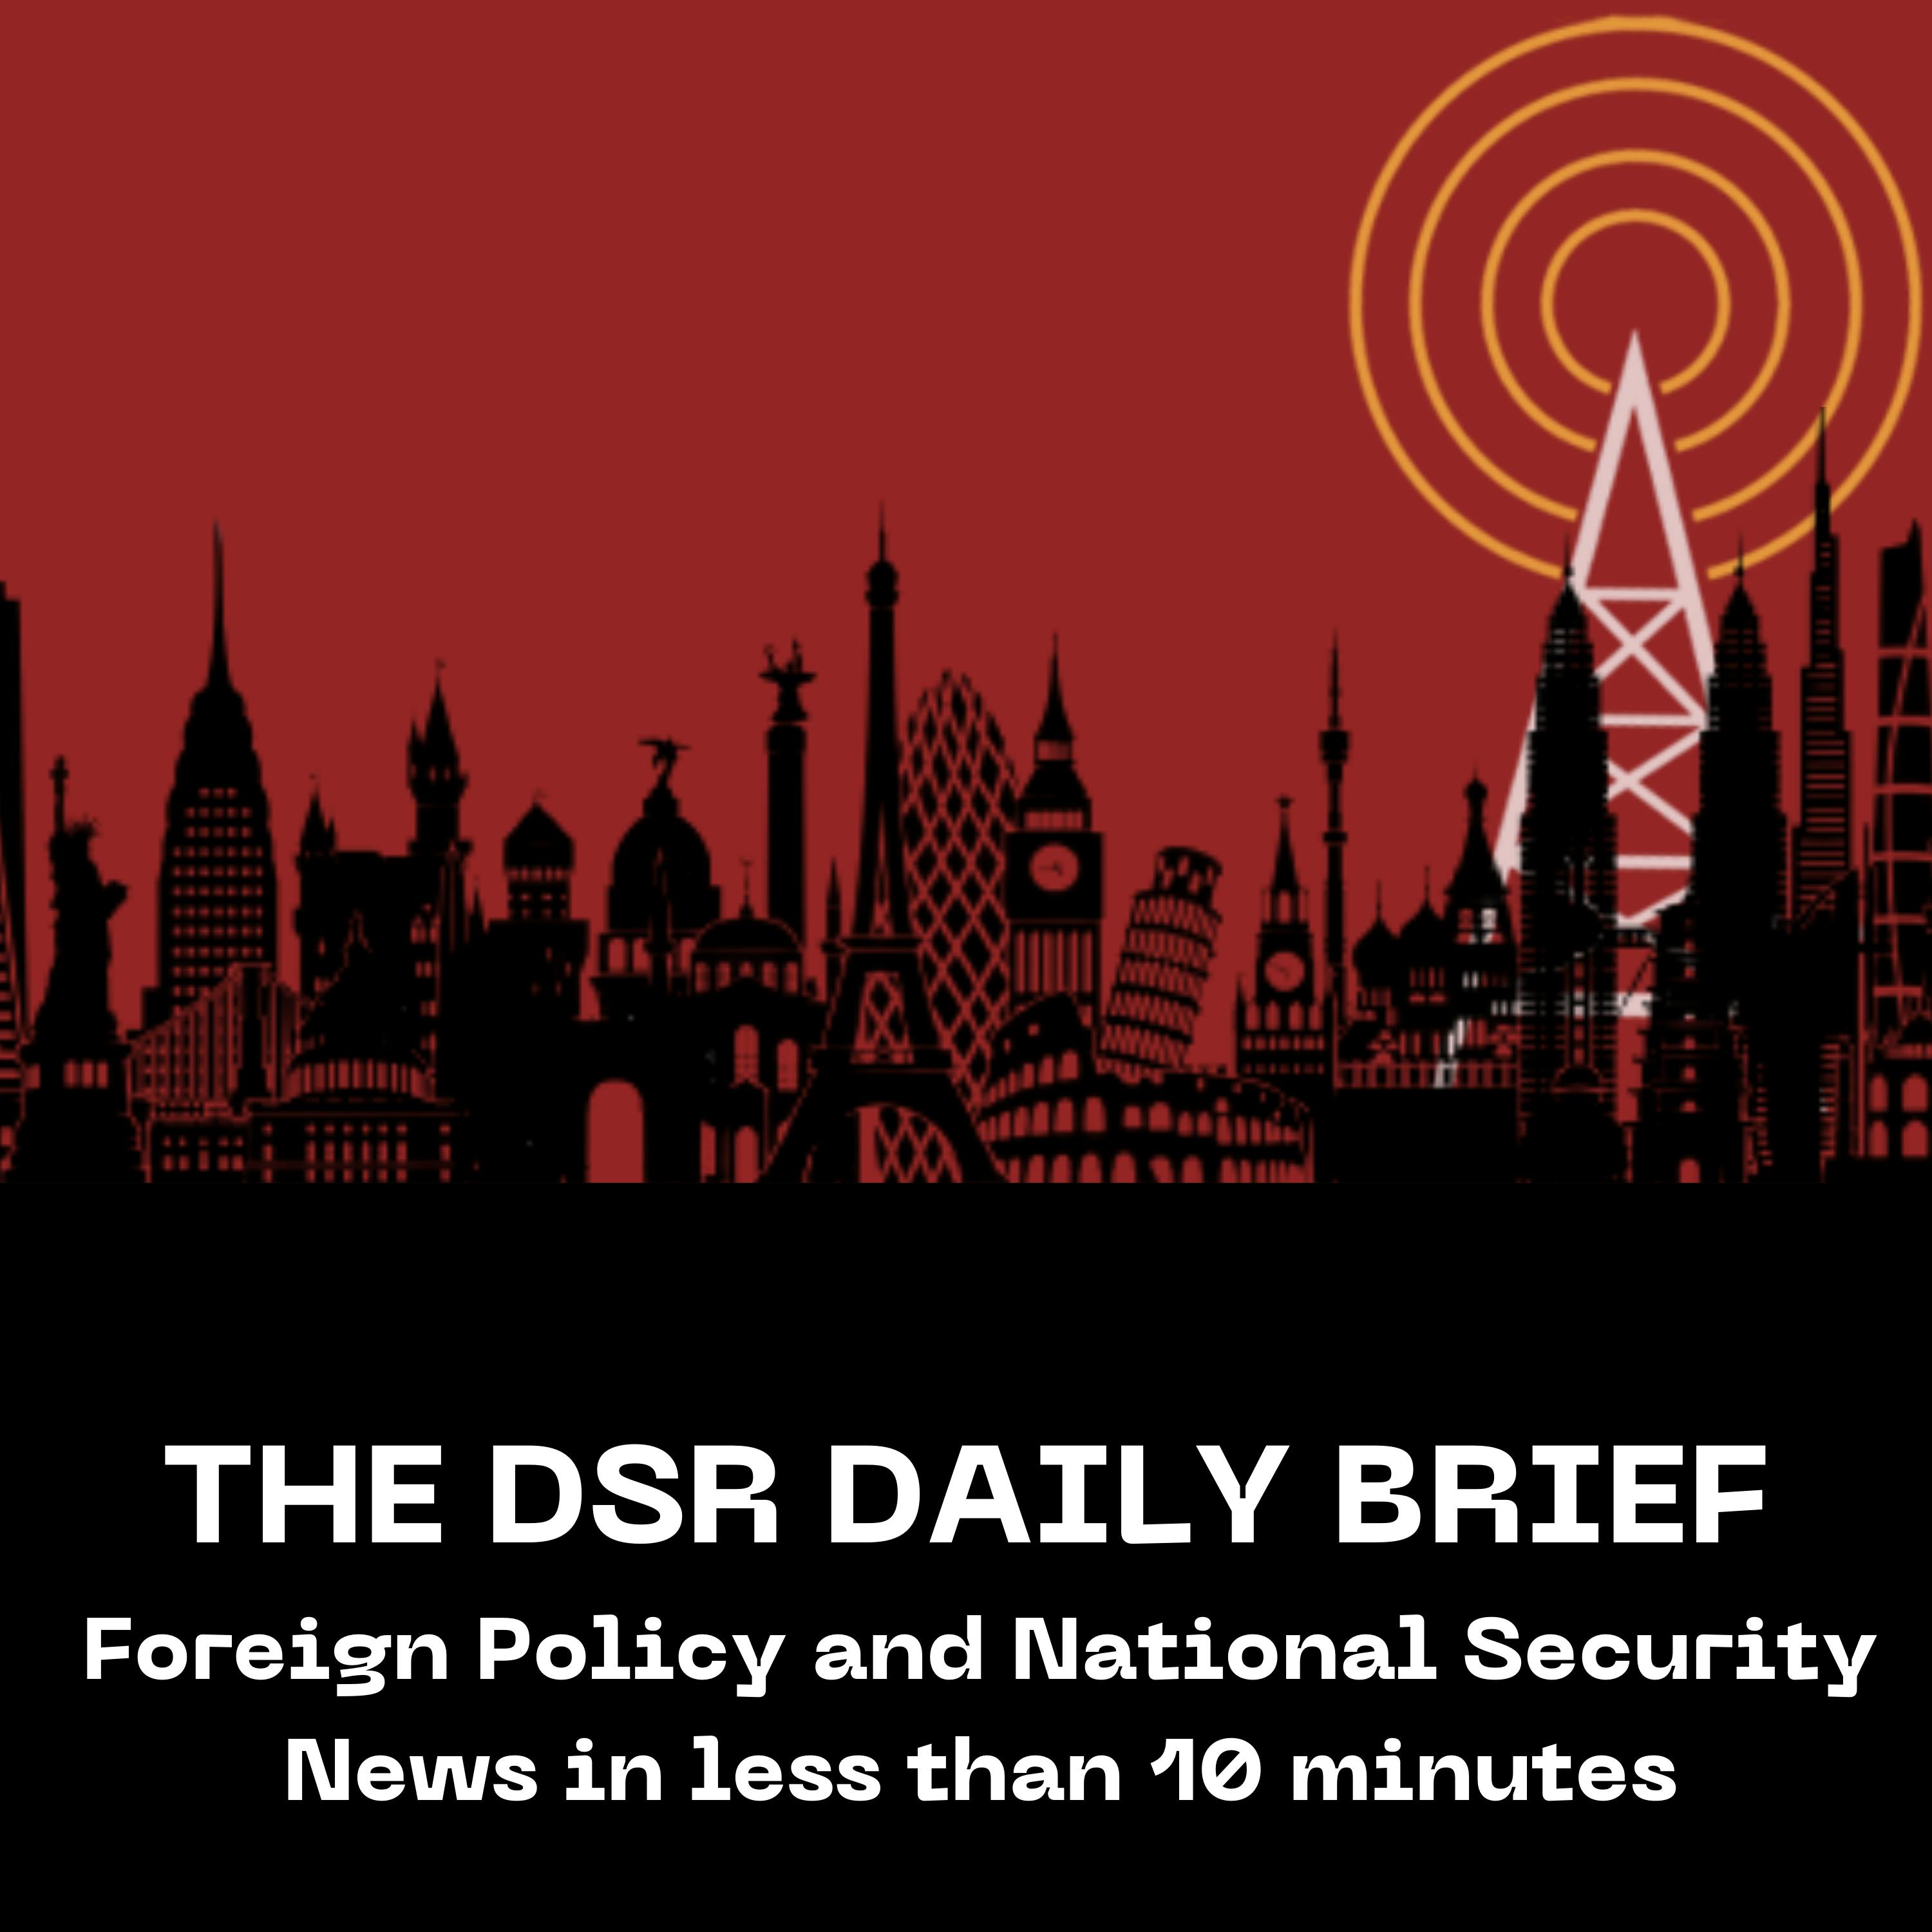 The DSR Daily for April 23: Israel Poised for Escalation in Gaza, New Accusations in Trump Trial